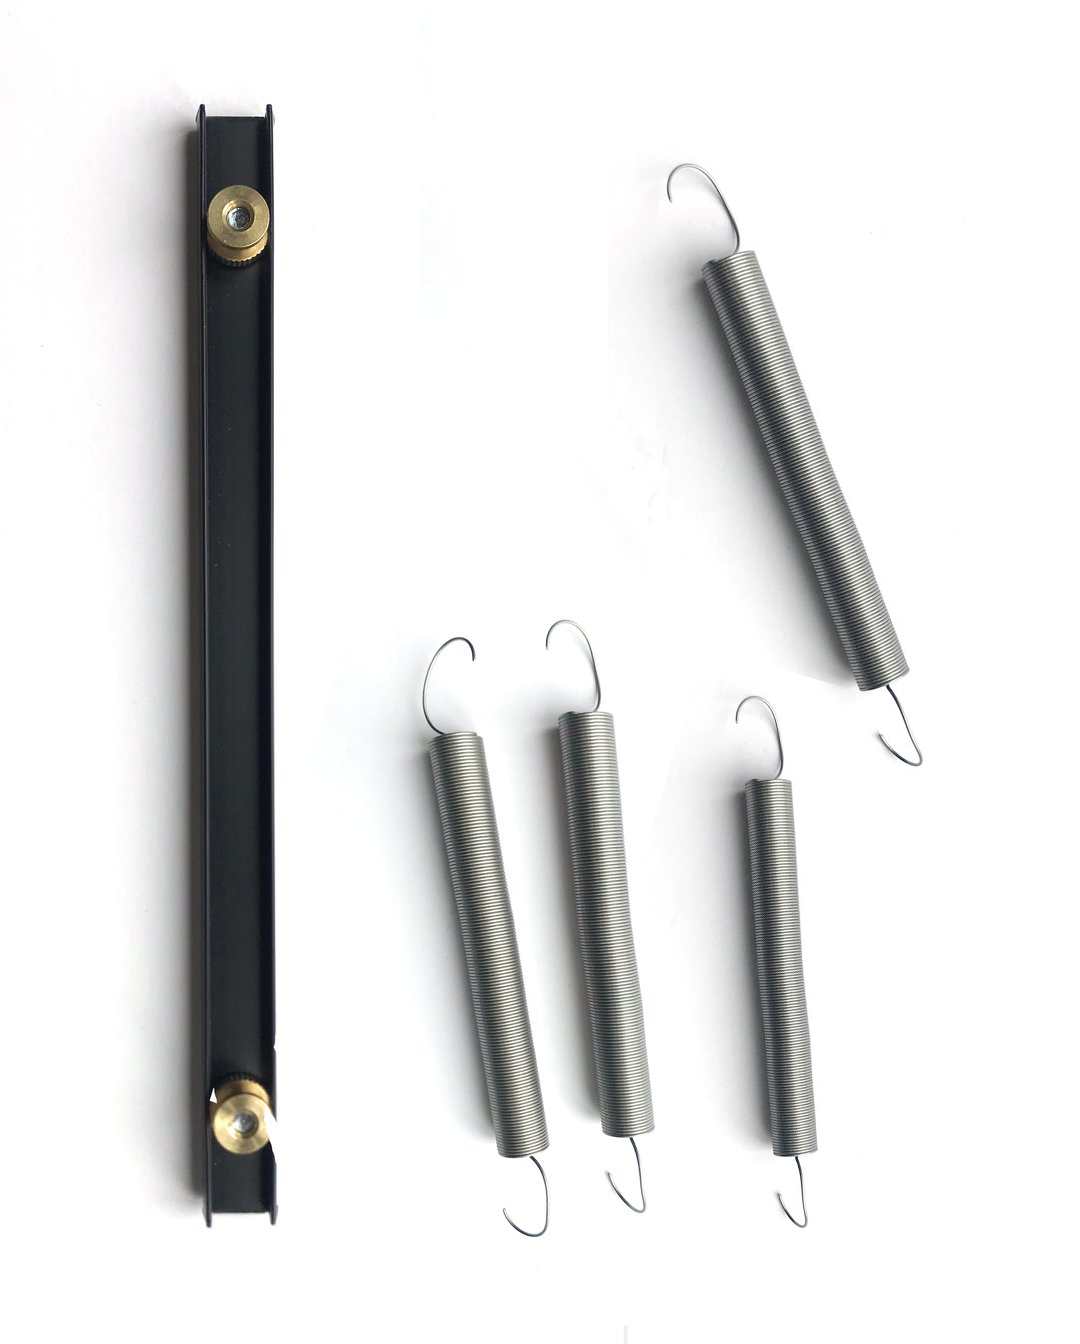 Bottom Spring Kit with One 14 Dent Coil, One 18 Dent Coil and Two 16 Dent Coils